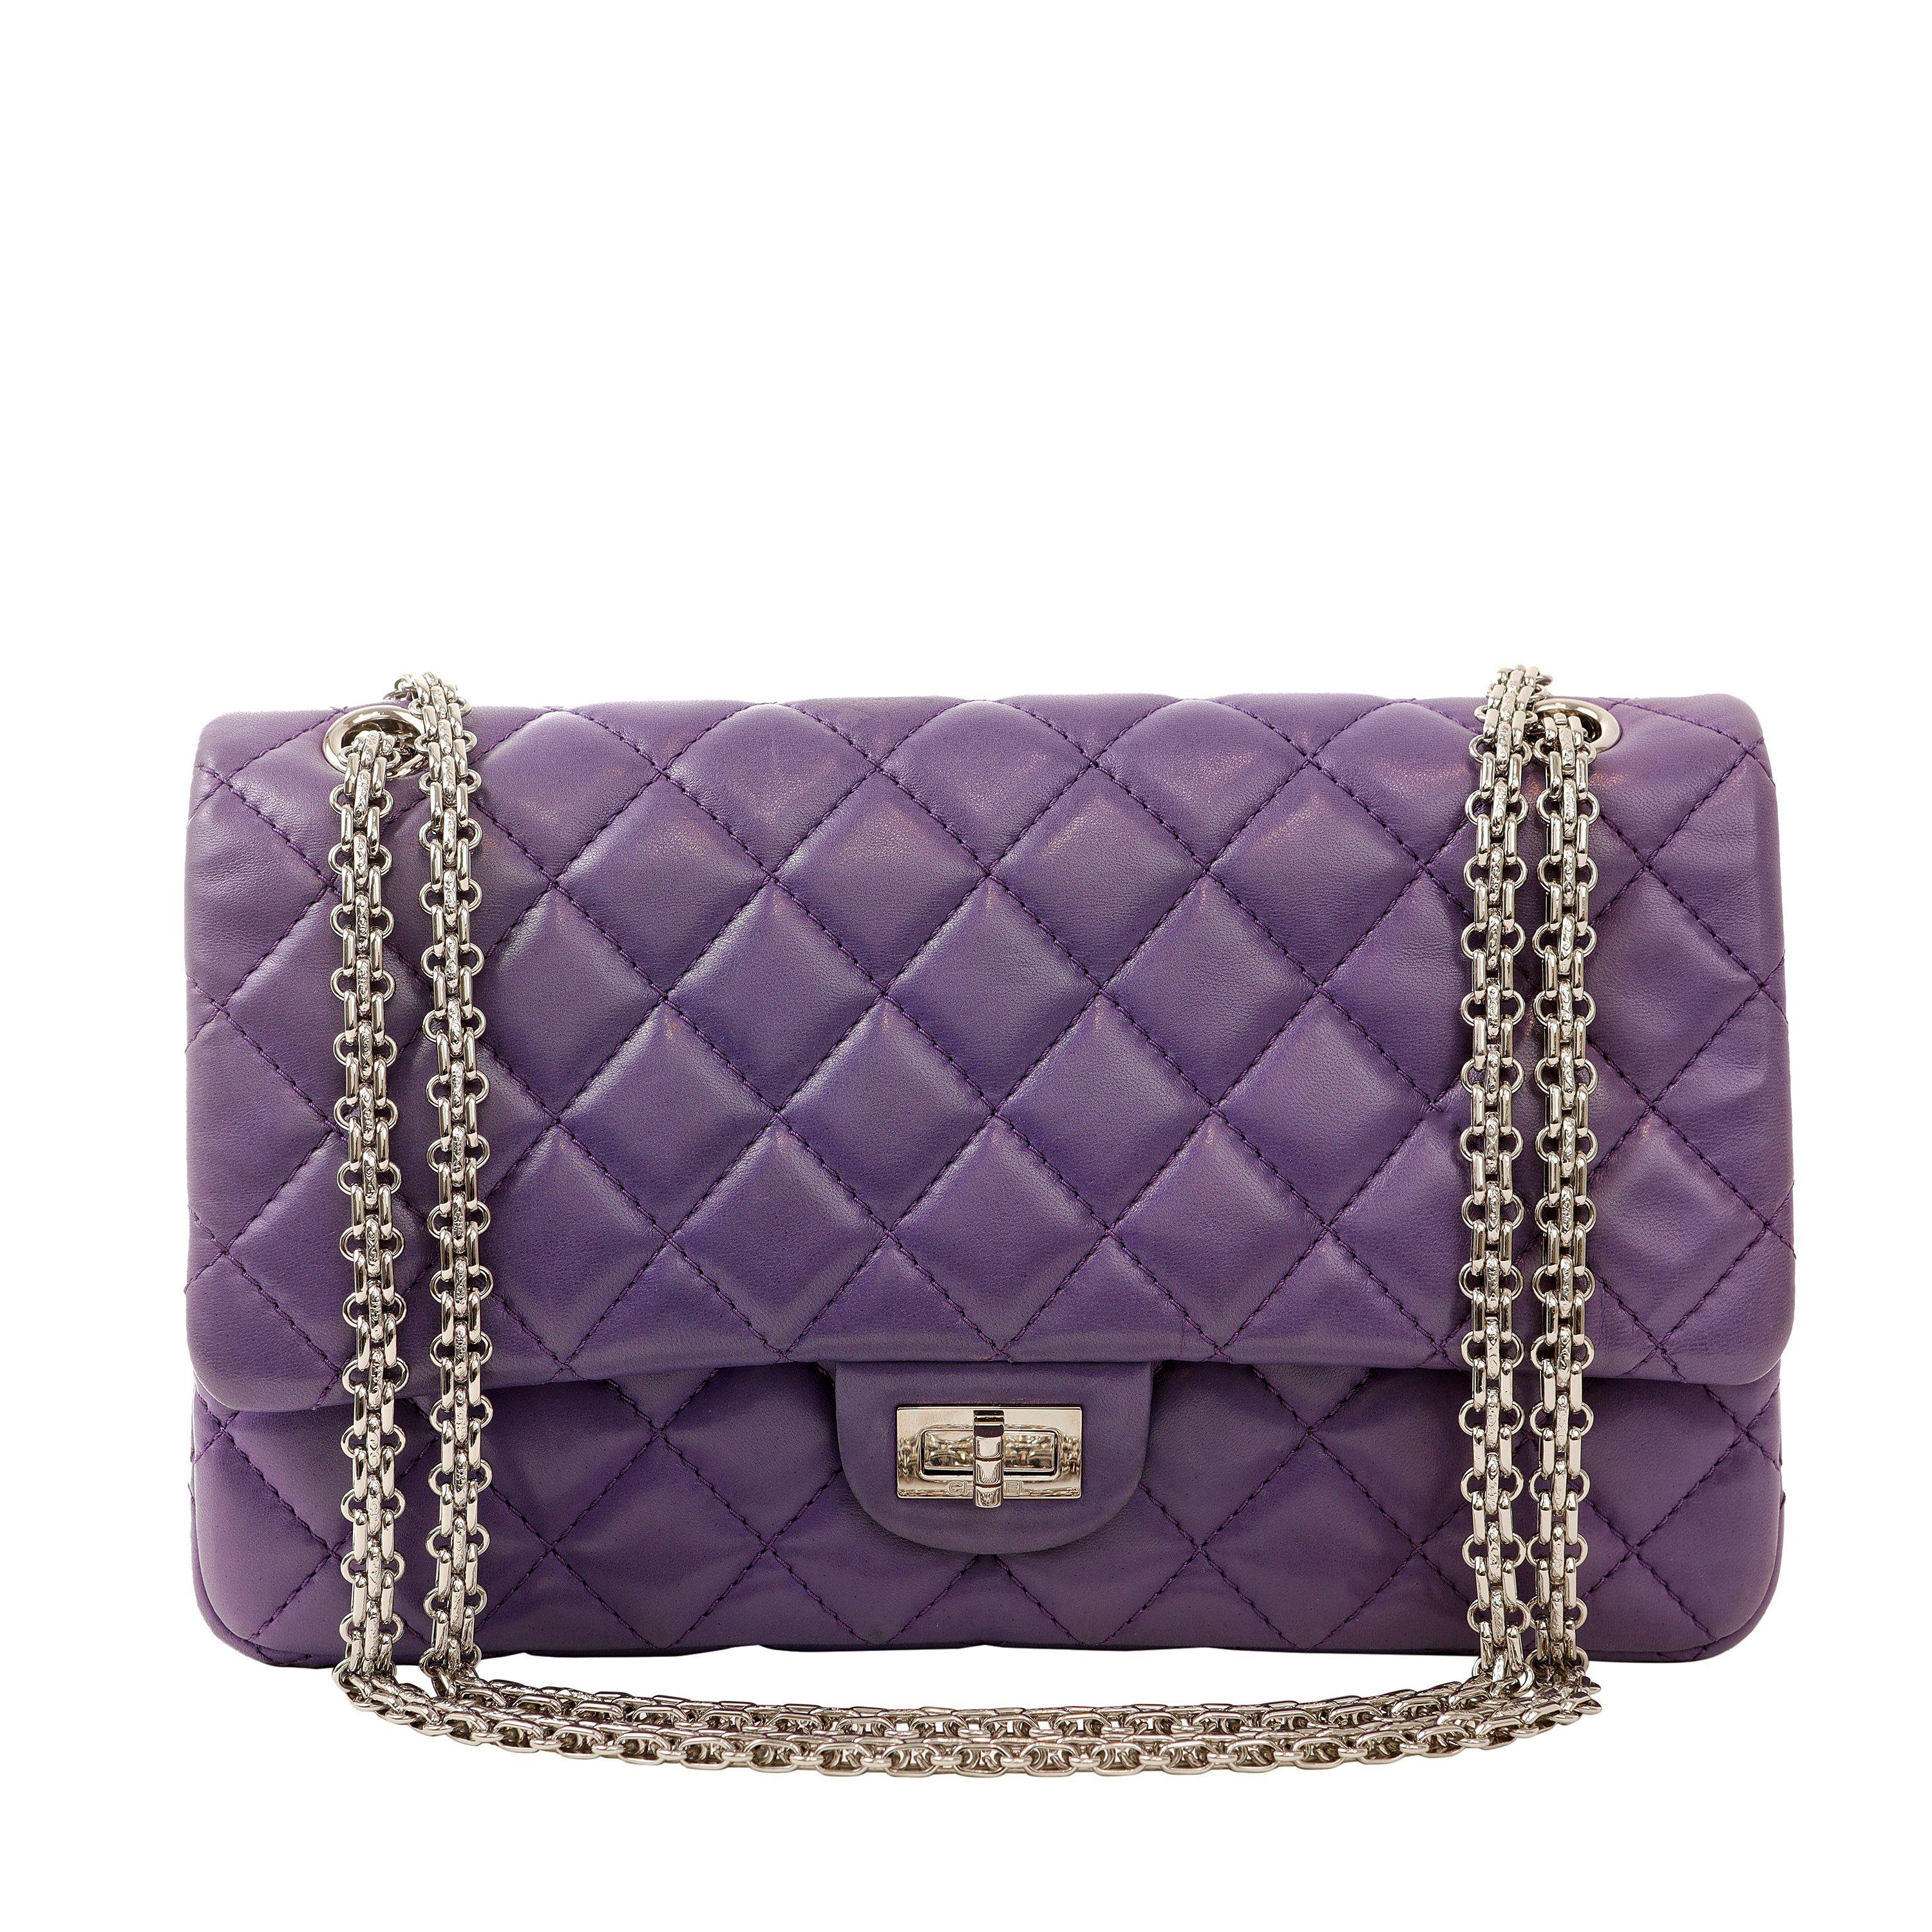 Chanel Purple Lambskin 2.55 Medium Classic Flap with Silver Hardware In Excellent Condition For Sale In Palm Beach, FL